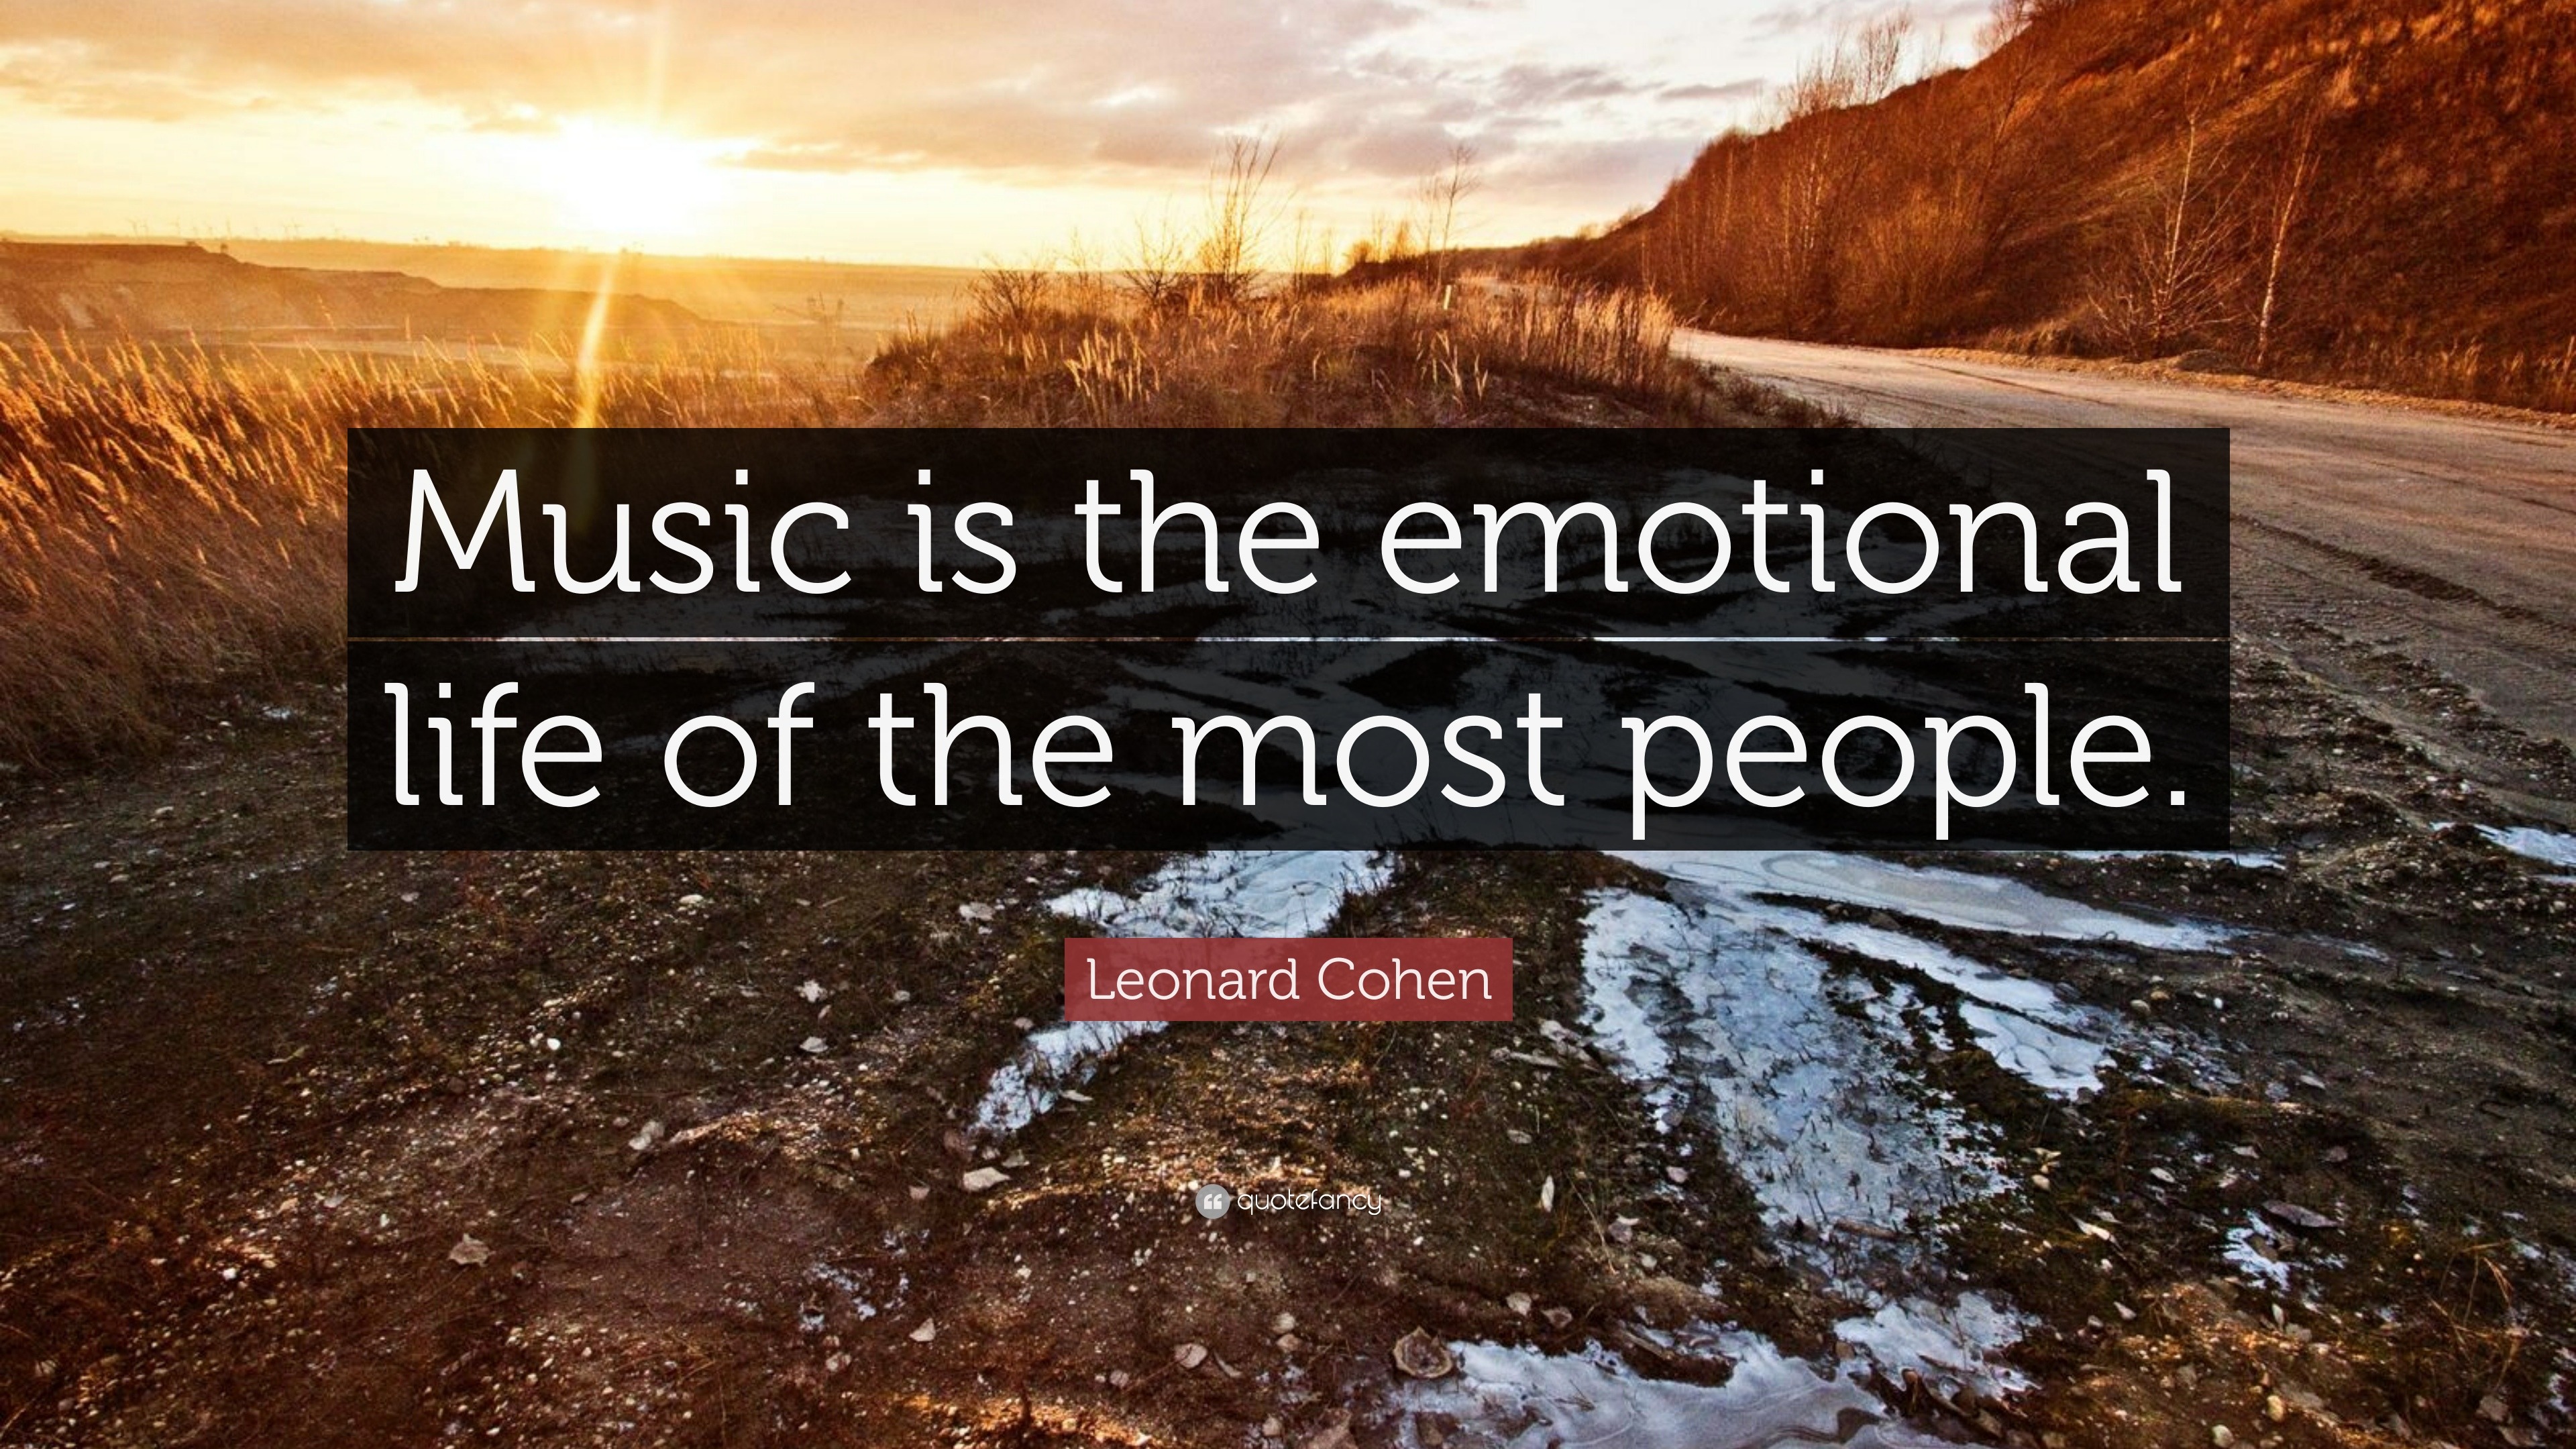 Leonard Cohen Quote “Music is the emotional life of the most people ”